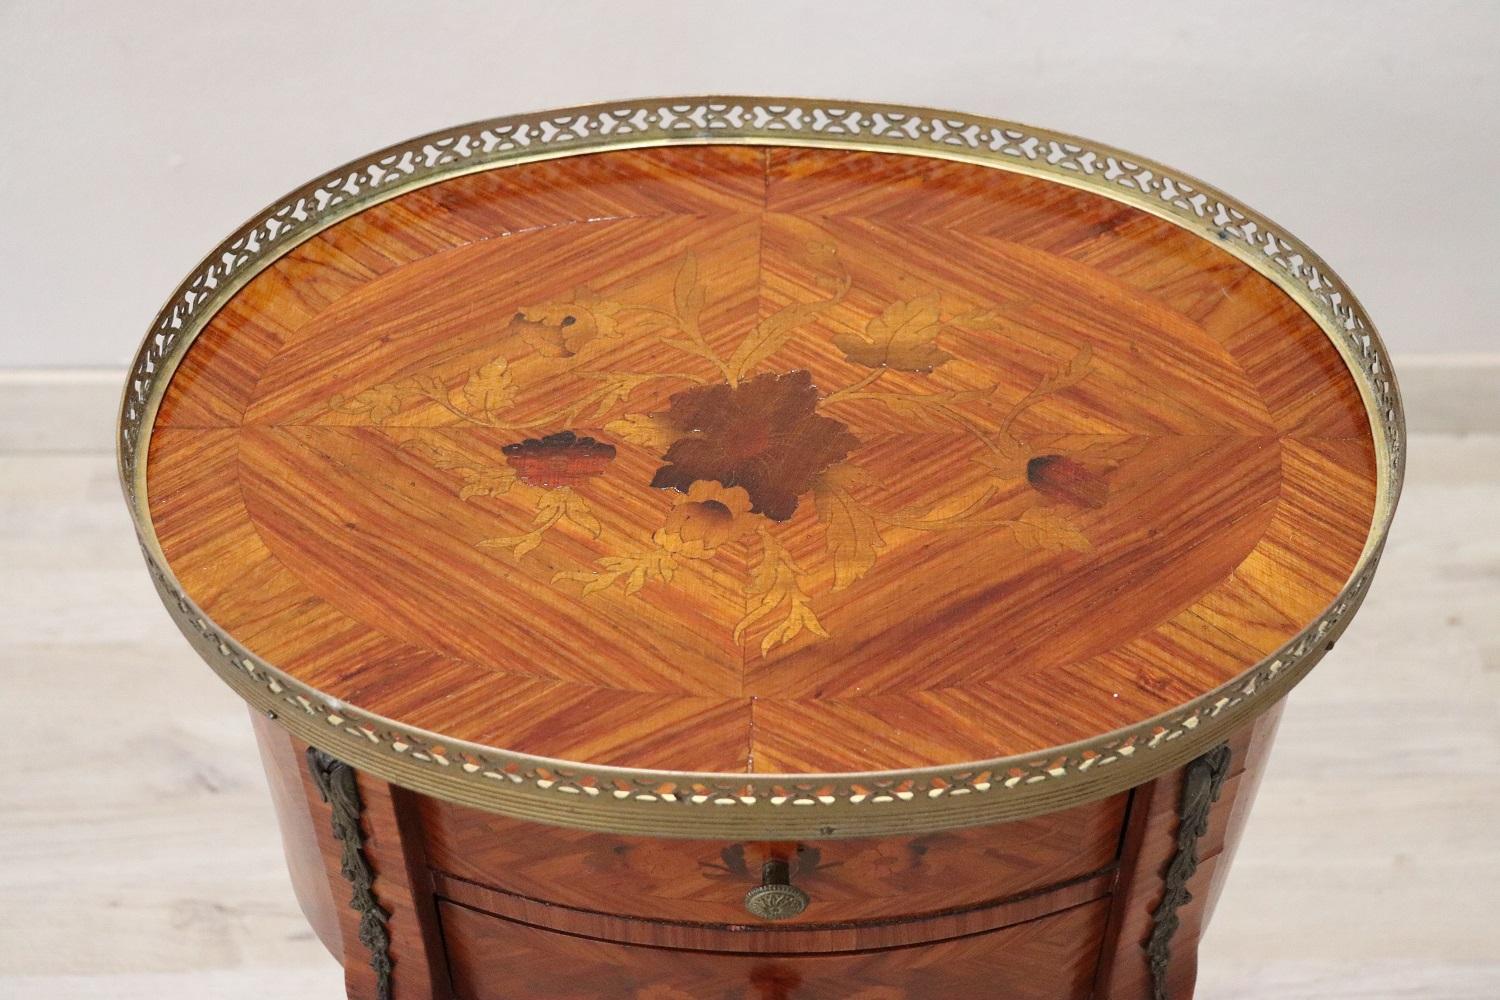 Rare and fine quality Italian Louis XV style 1970s side table or nightstand in inlay wood with floral taste decoration. The side table has a particular bean shape, the legs are long and slender. The decoration is on each side so you can place the